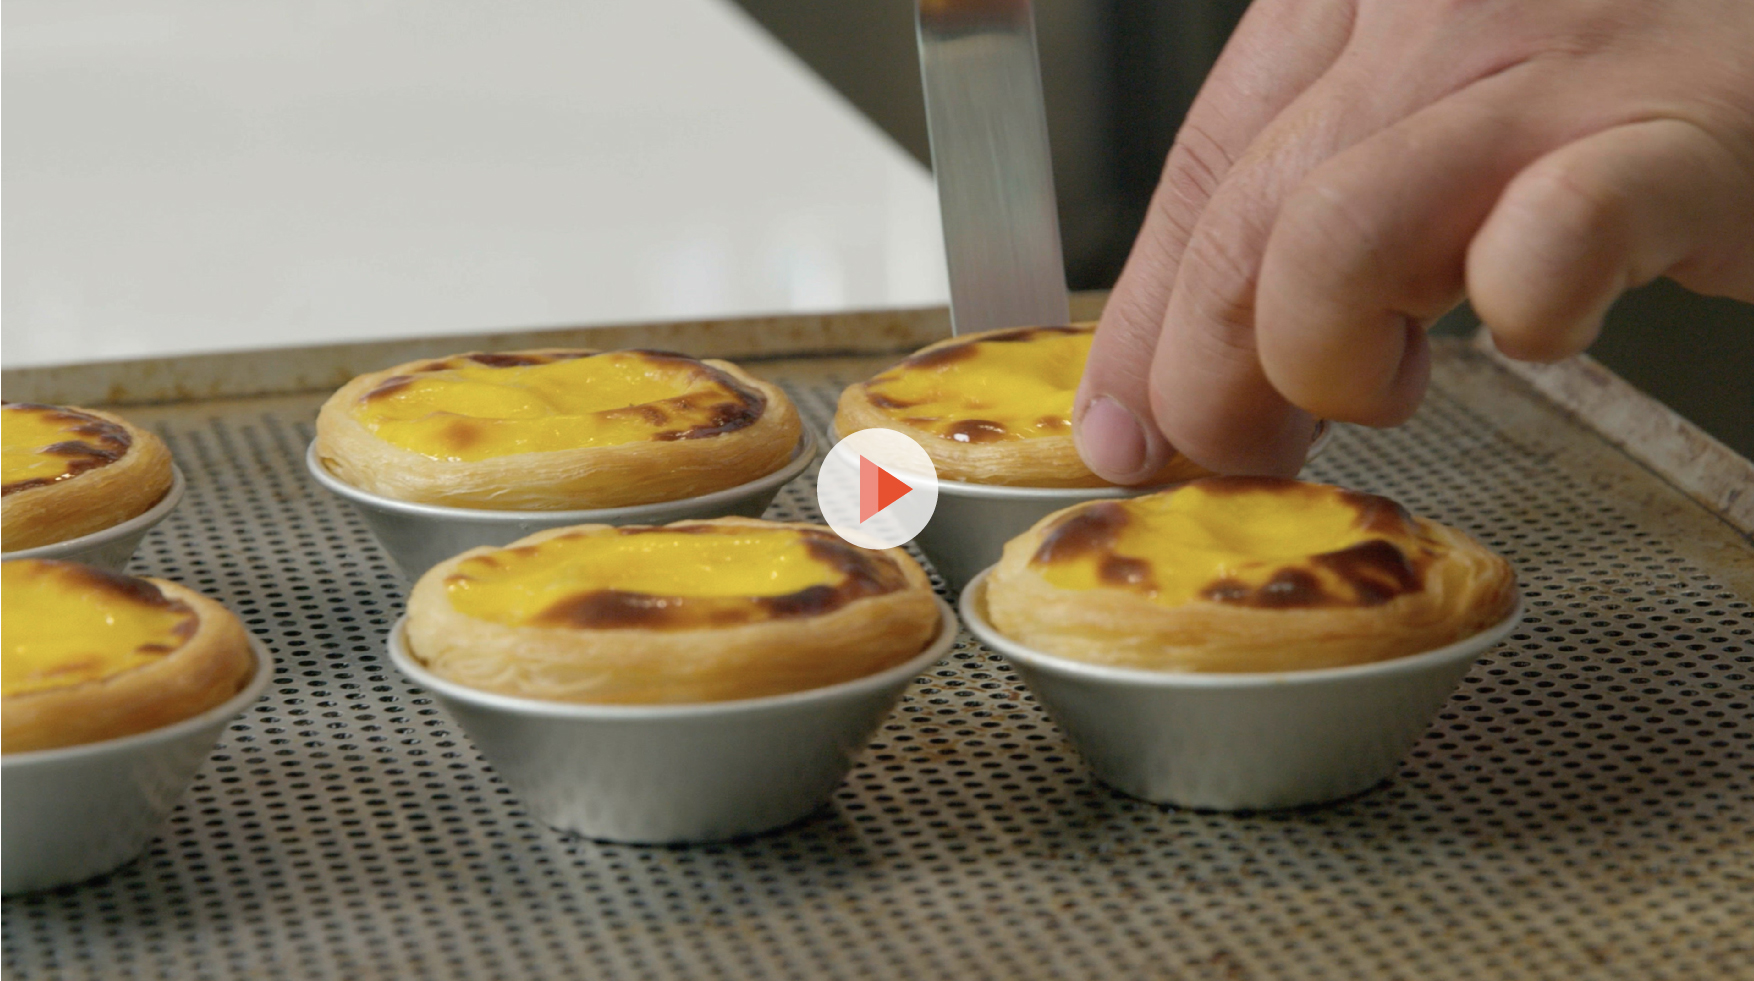 Taste the differences between Macao and Portuguese egg tarts